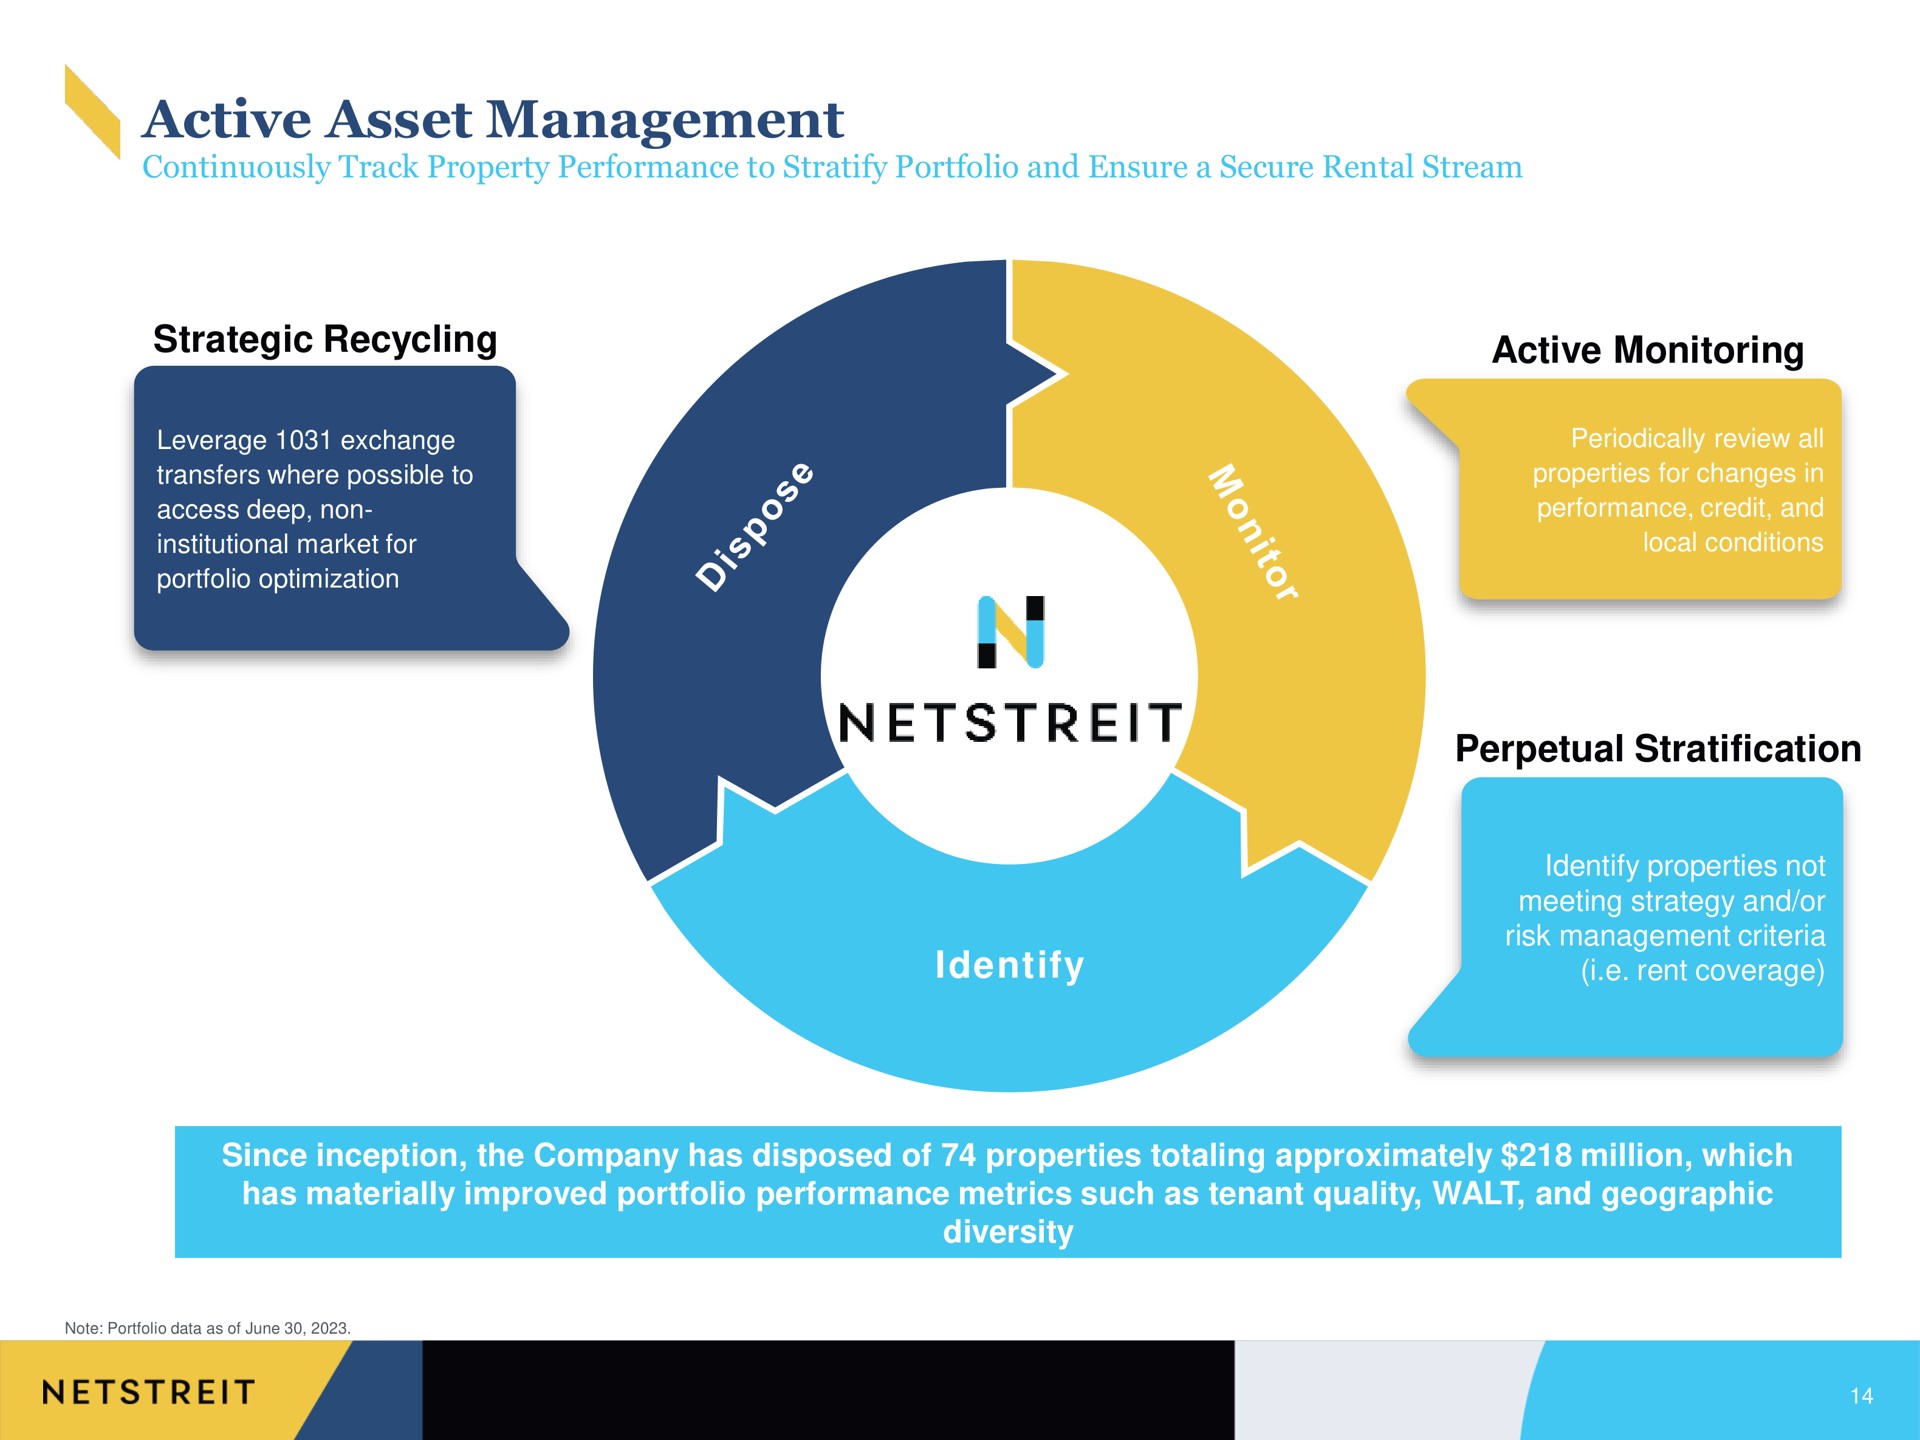 active asset management strategic recycling active monitoring perpetual stratification identify | Netstreit